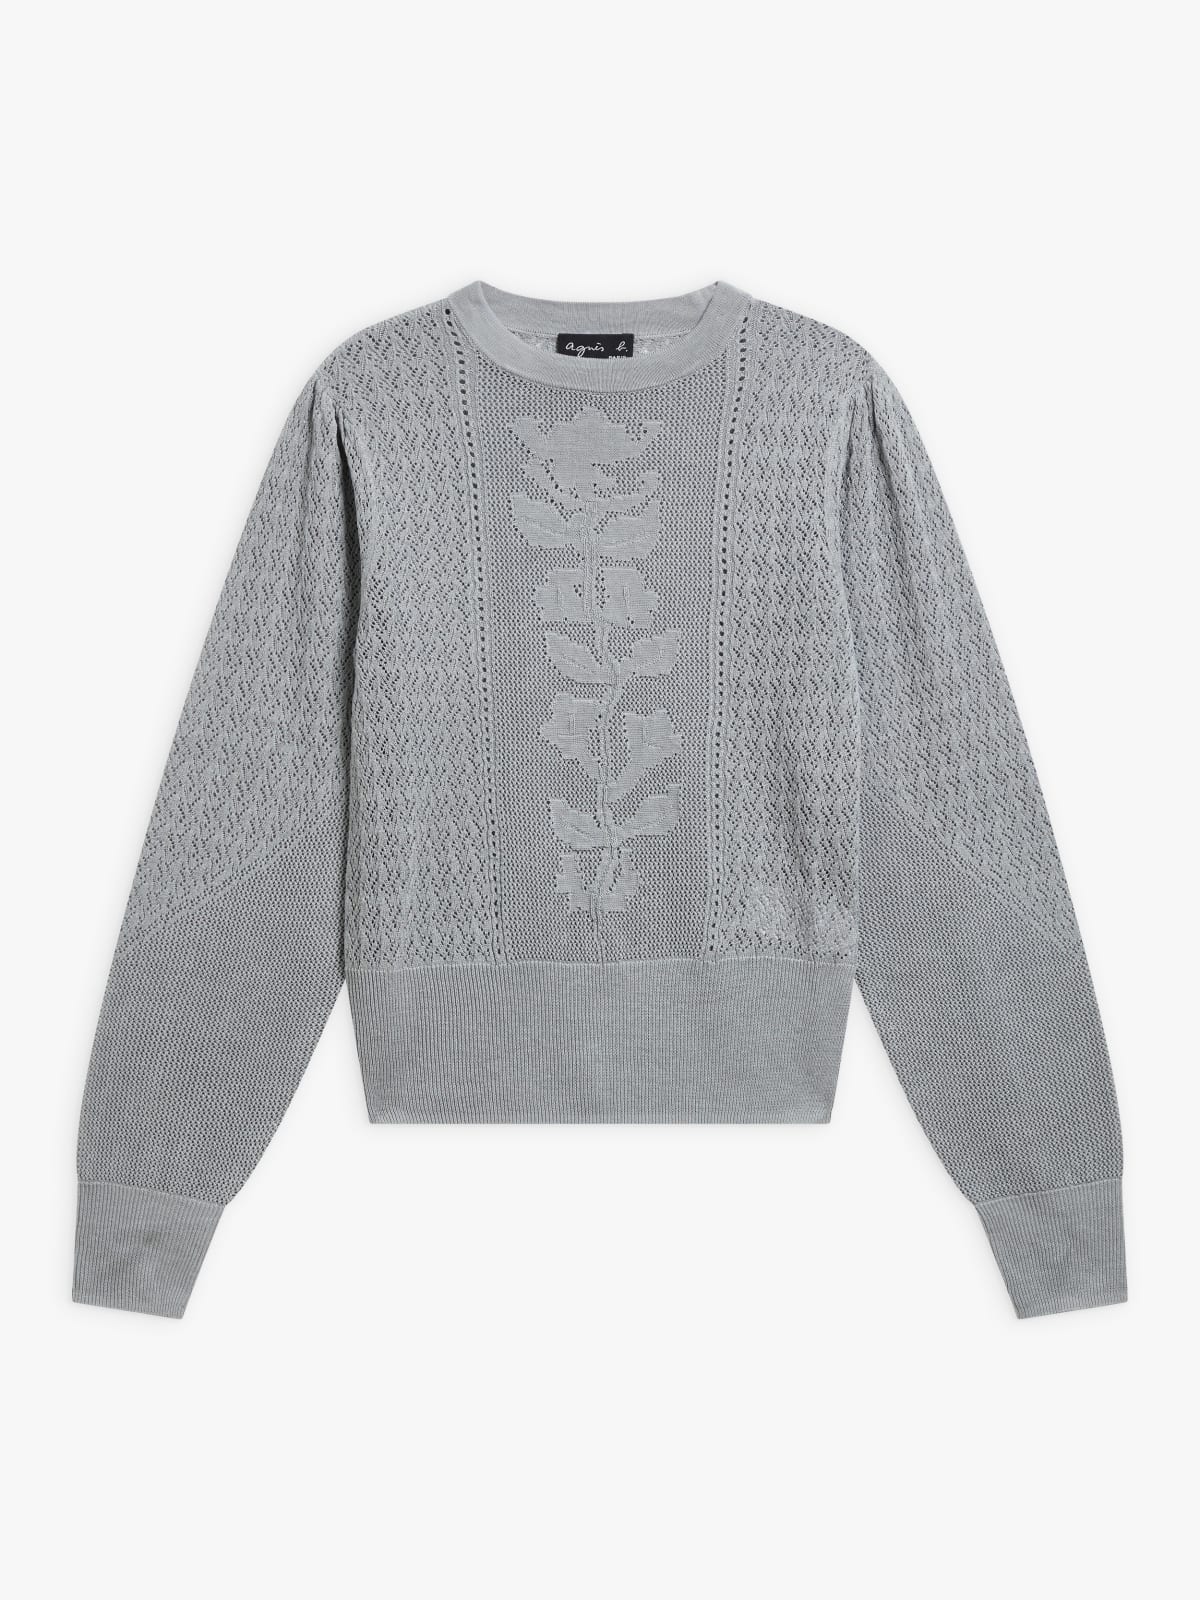 grey silk and cotton Bluebell sweater